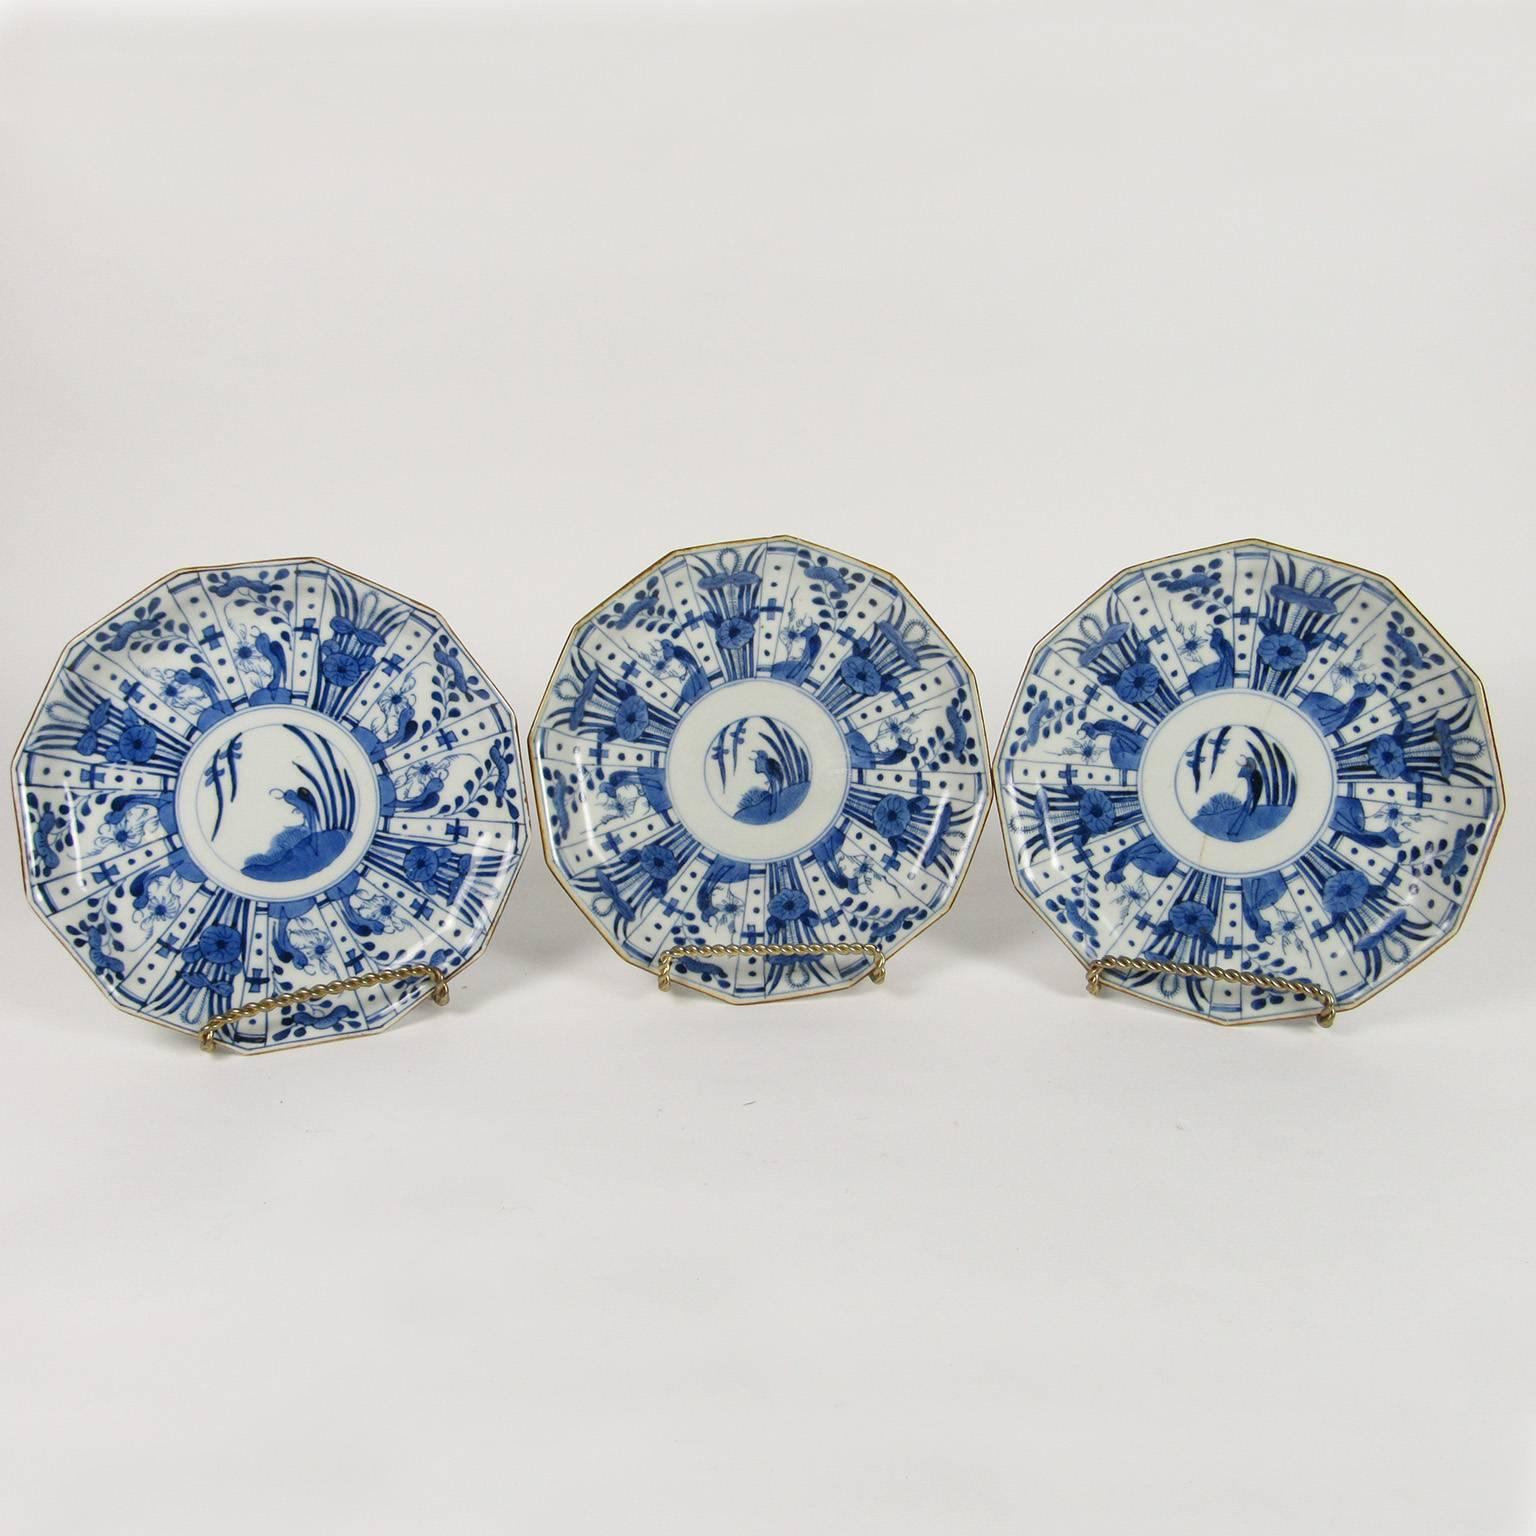 Set of six rare Japanese Ko-Imari blue and white porcelain plates, late 19th century, in the shape of a dodecagon (12 sides), with mark on bottom in underglaze blue. Diameter: 7 1/4 inches.